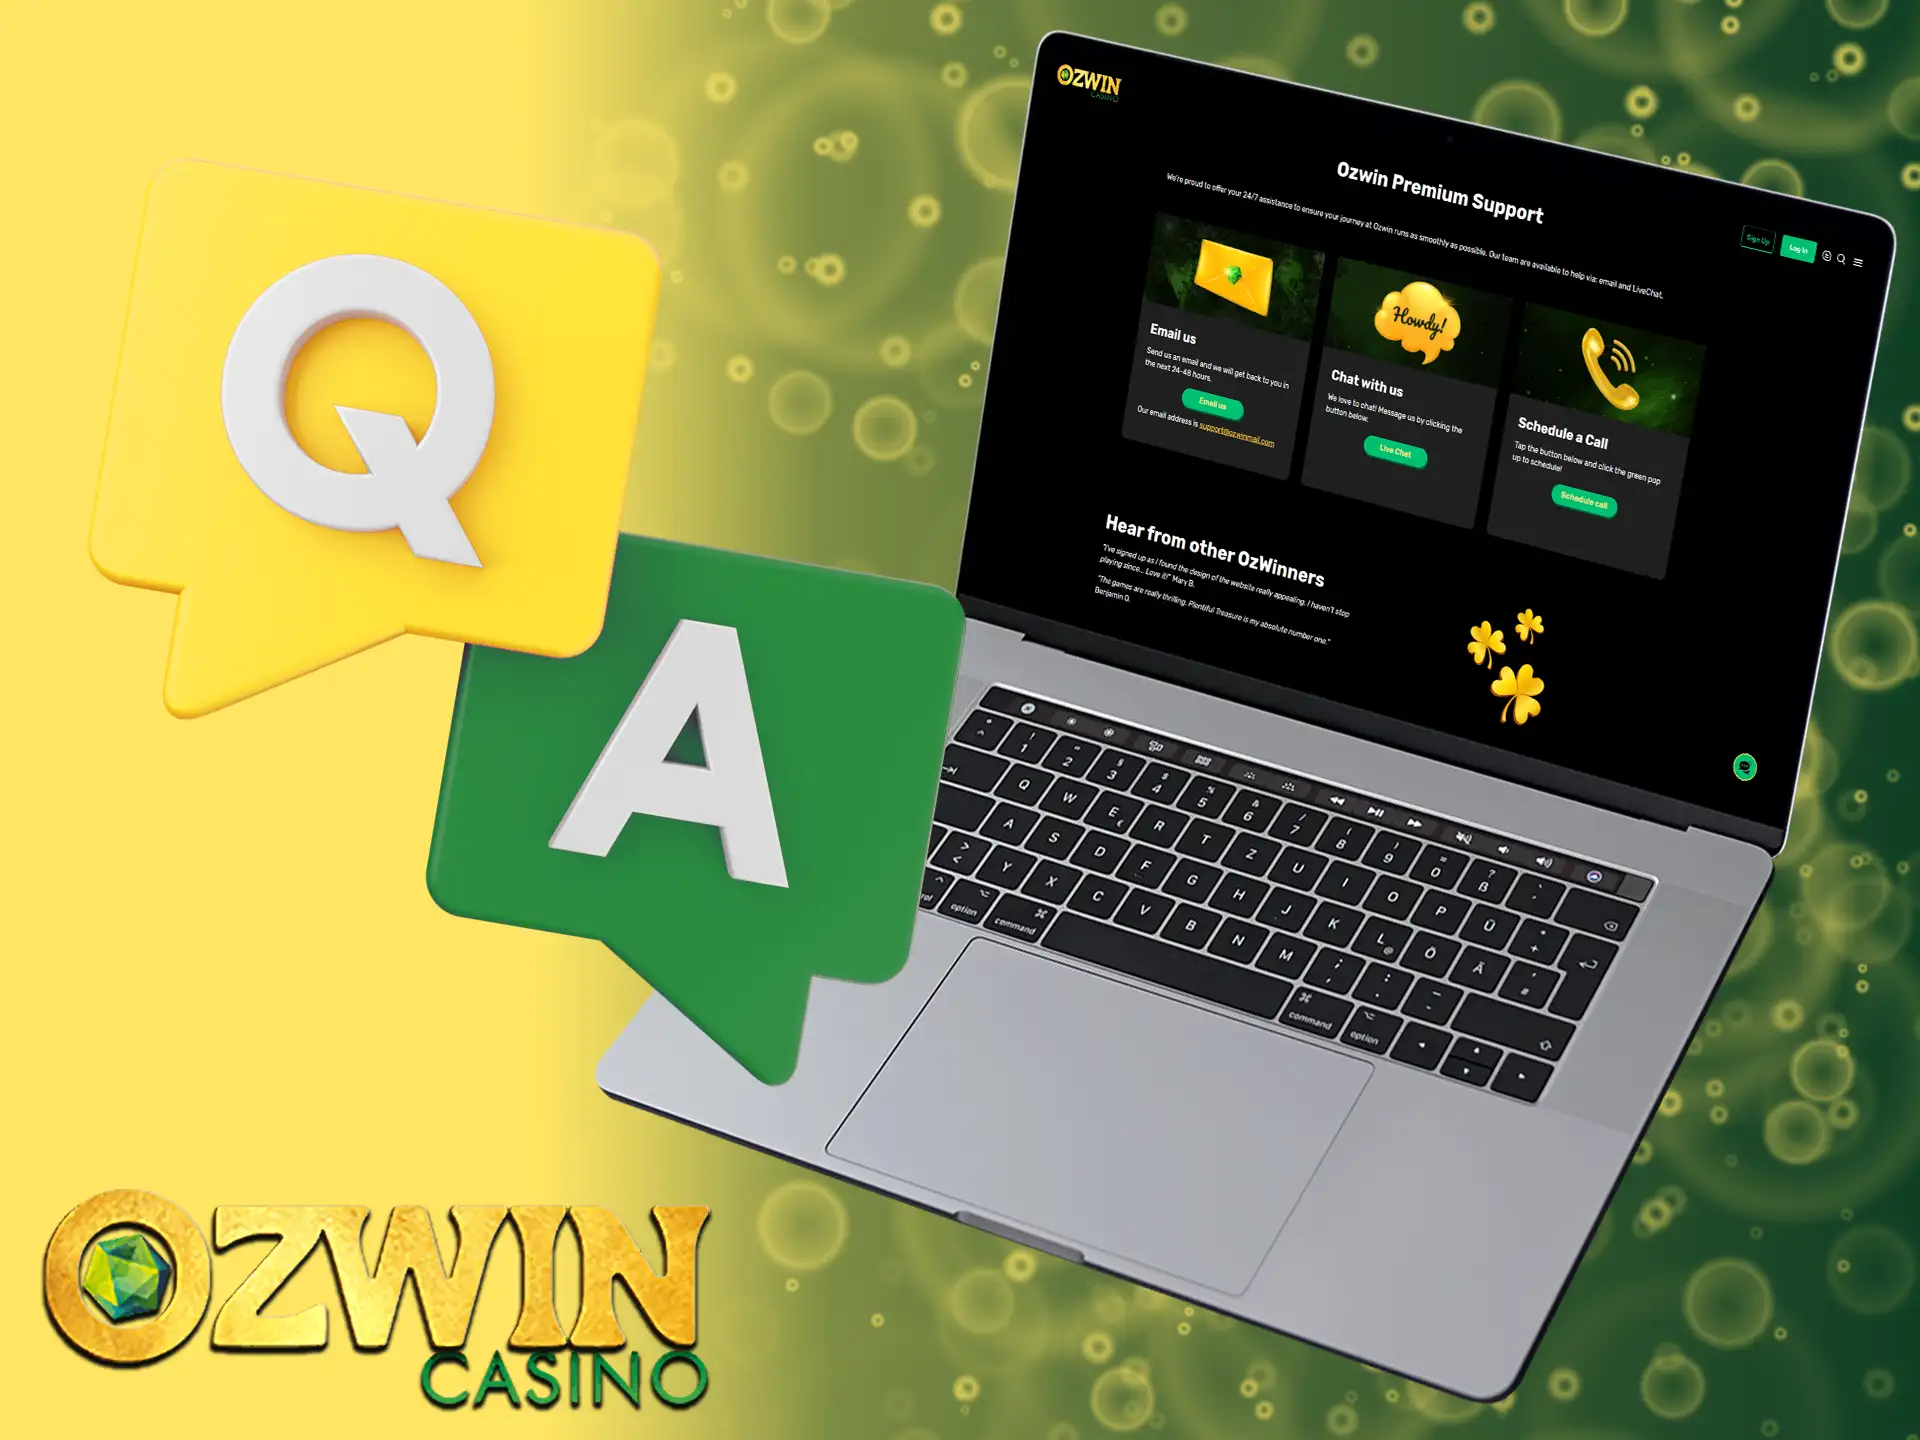 Ozwin Casino prioritizes your convenience with a highly reachable and helpful support team!